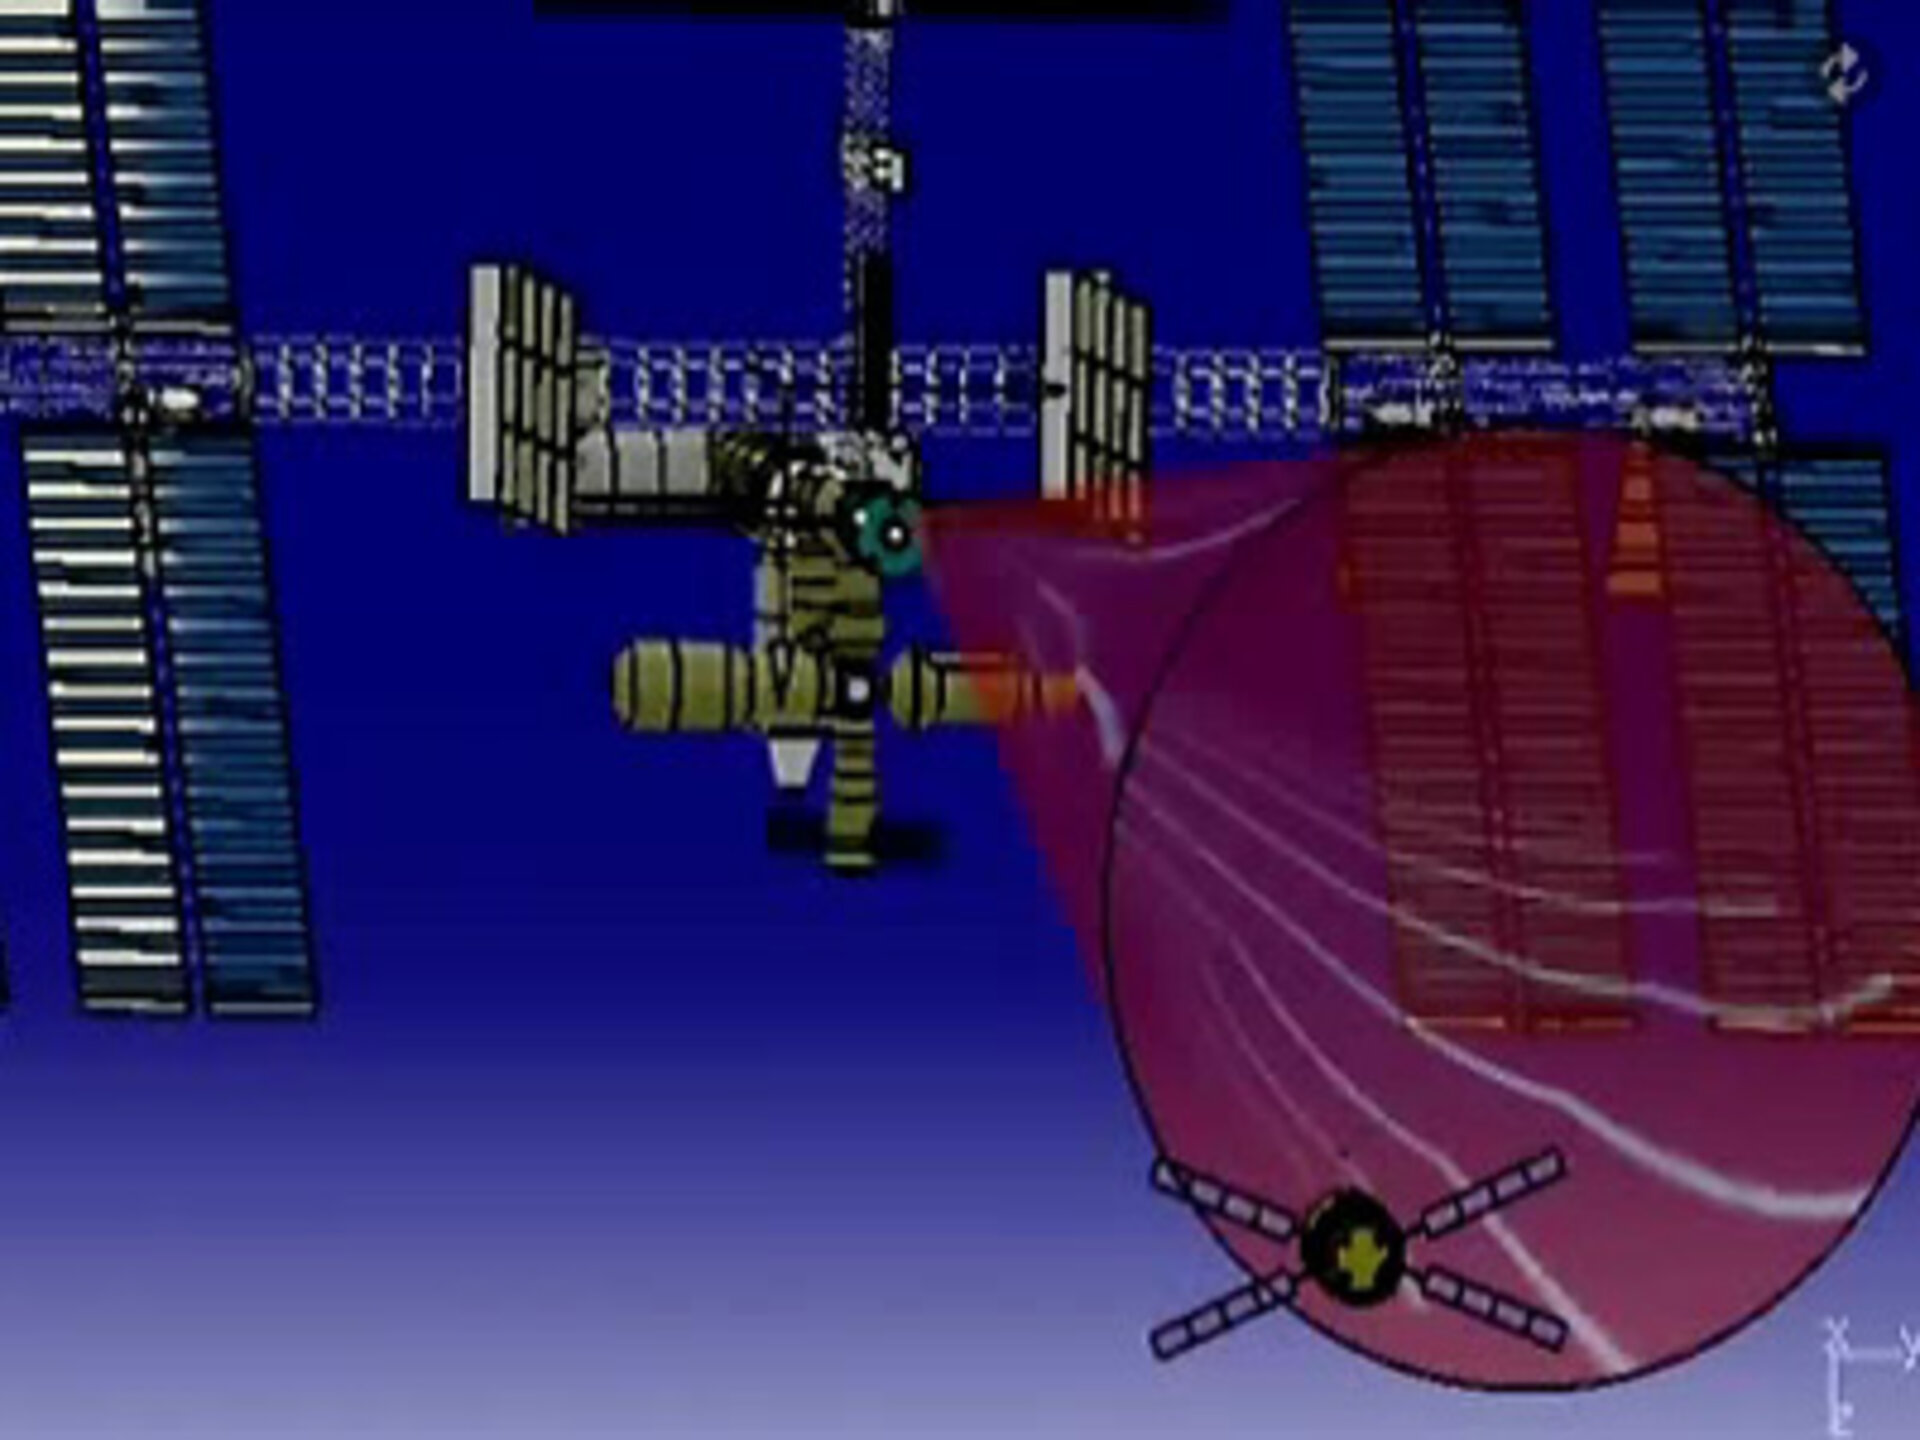 Final approach of ATV towards ISS takes place in a predefined rendezvous safety corridor (click to enlarge)